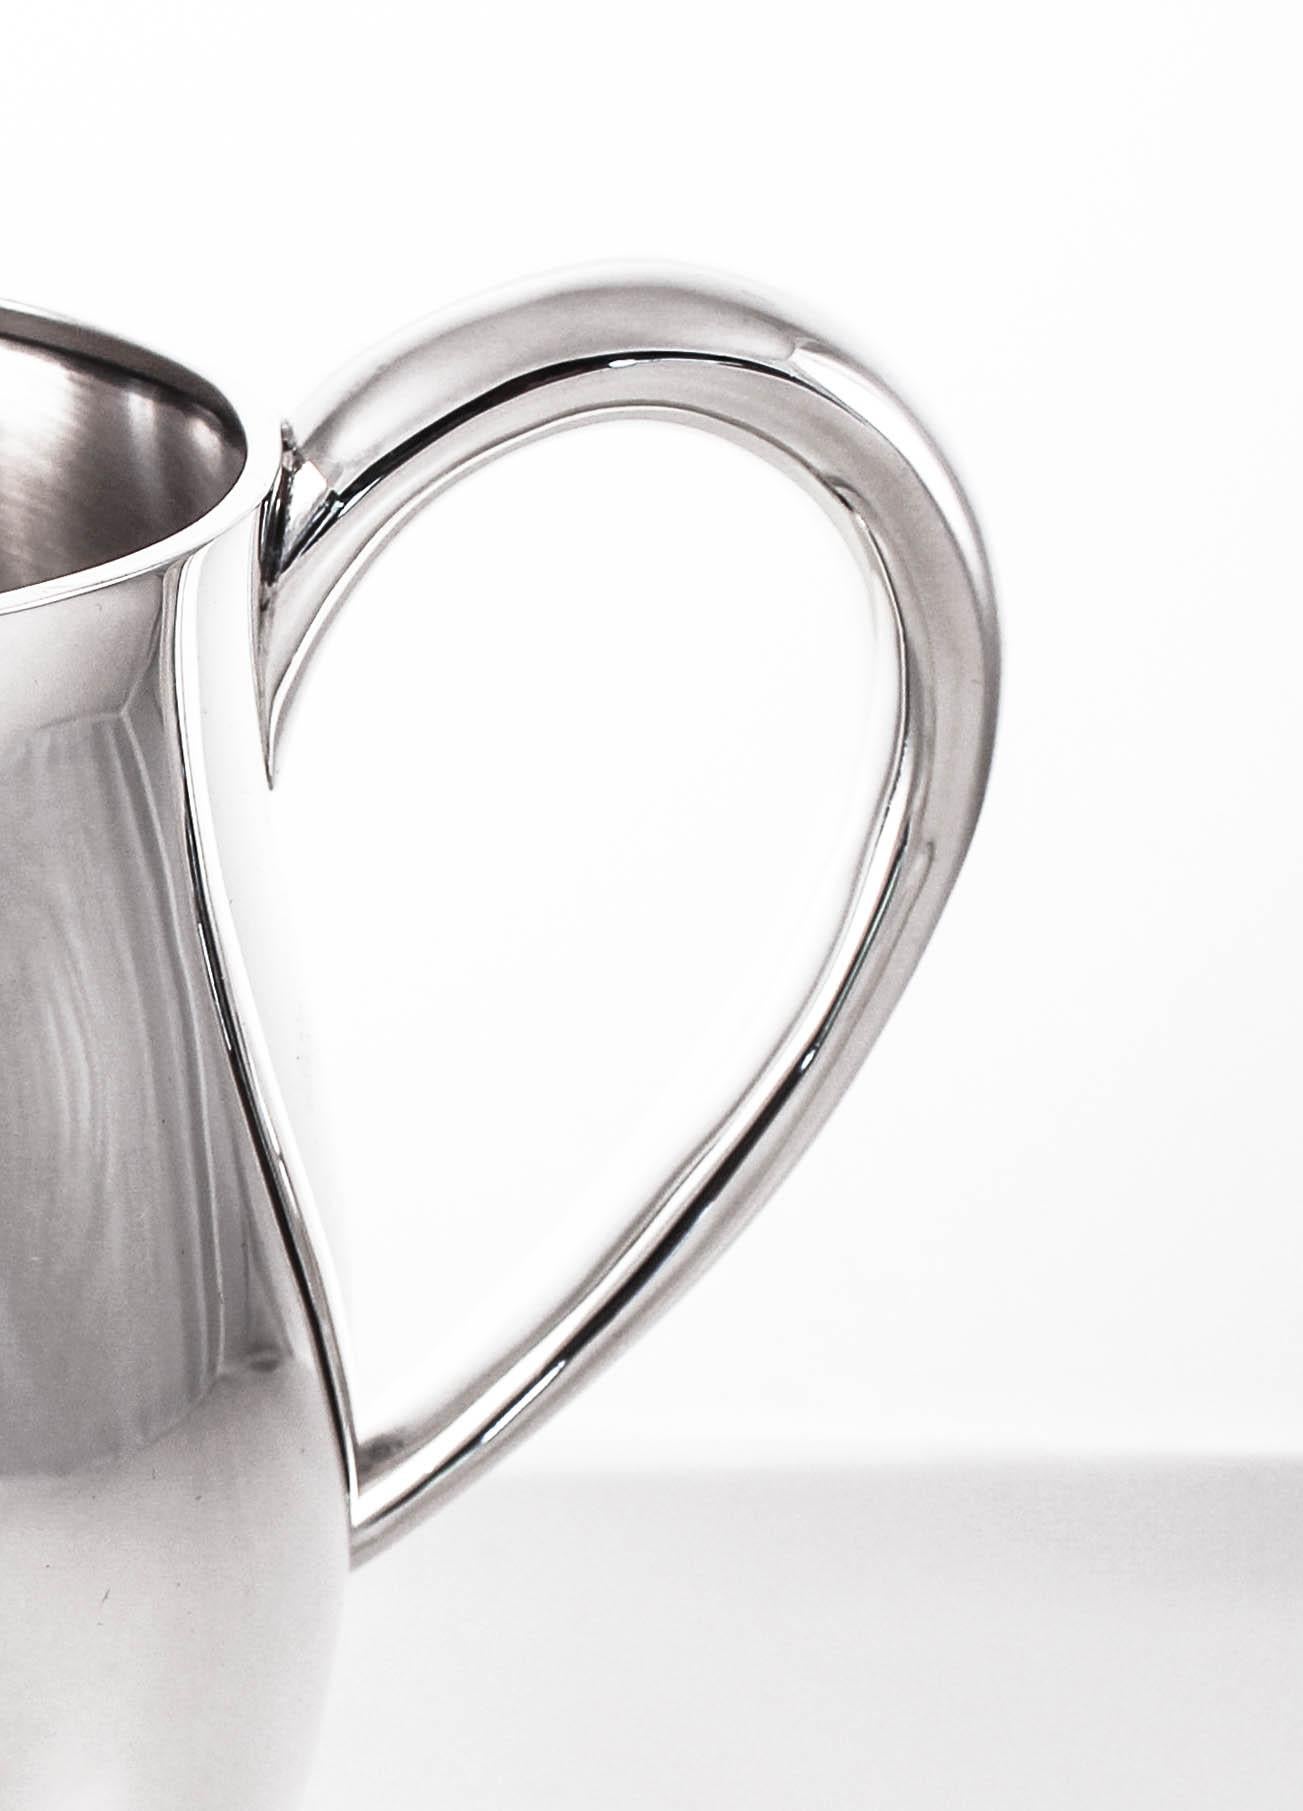 Offering a sterling silver water pitcher by Tuttle Silversmiths. It’s style and simplicity is reflective of the WWII period. Understated and without decoration, it was made during a time when elaborate decorative items were not popular. But these